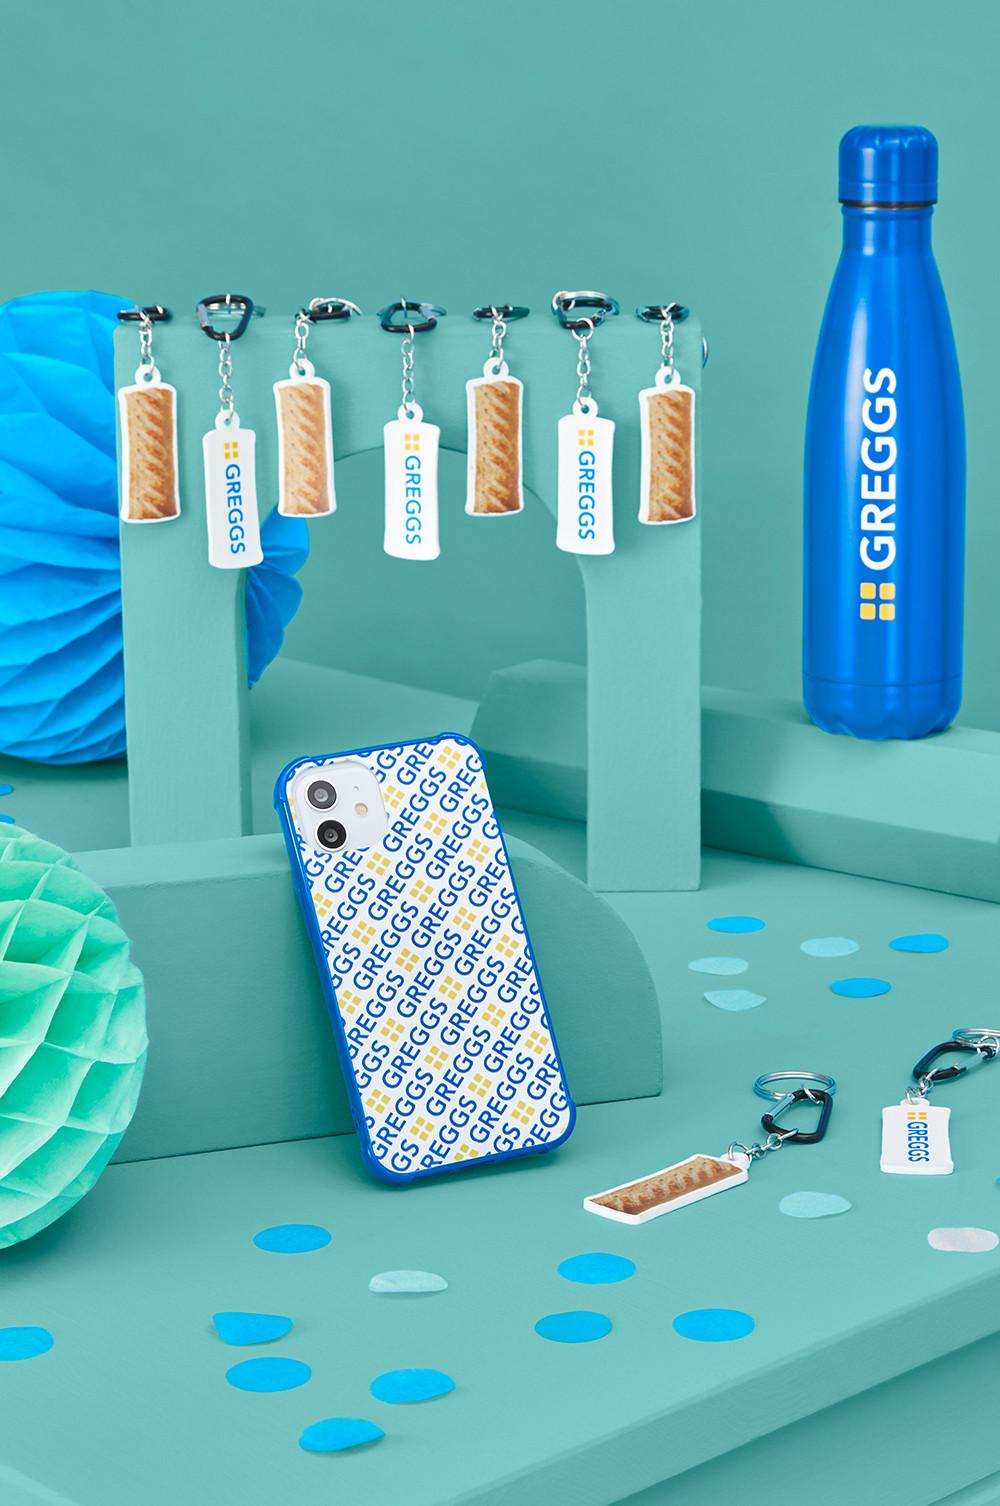 Phone case, water bottle and key chains